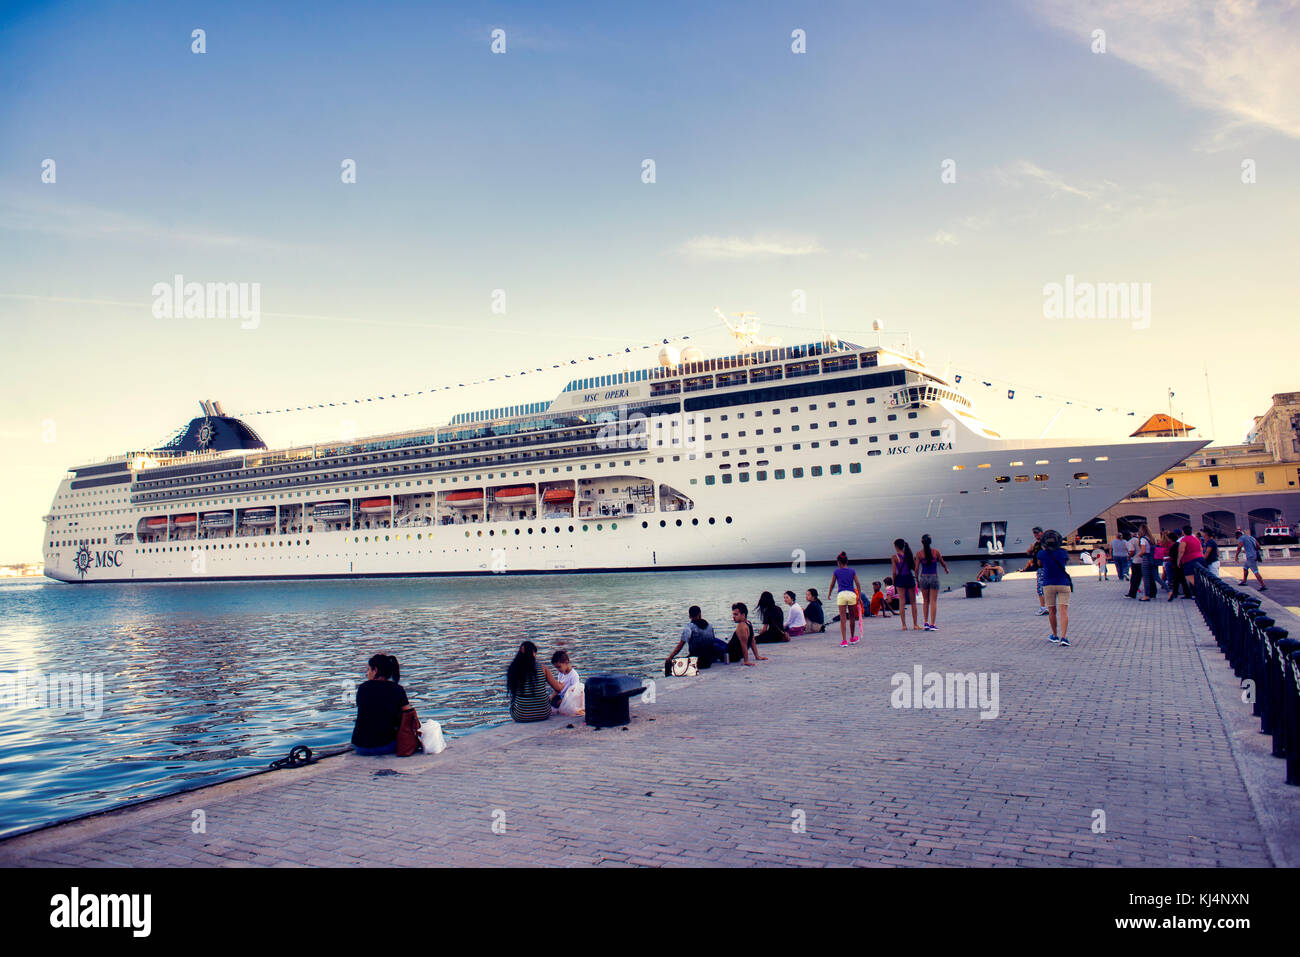 HAVANA, CUBA - FEB 17,2017 : The MSC Opera cruise ship docked at the port of Havana showing the tourist boom the island has experienced in the last fe Stock Photo